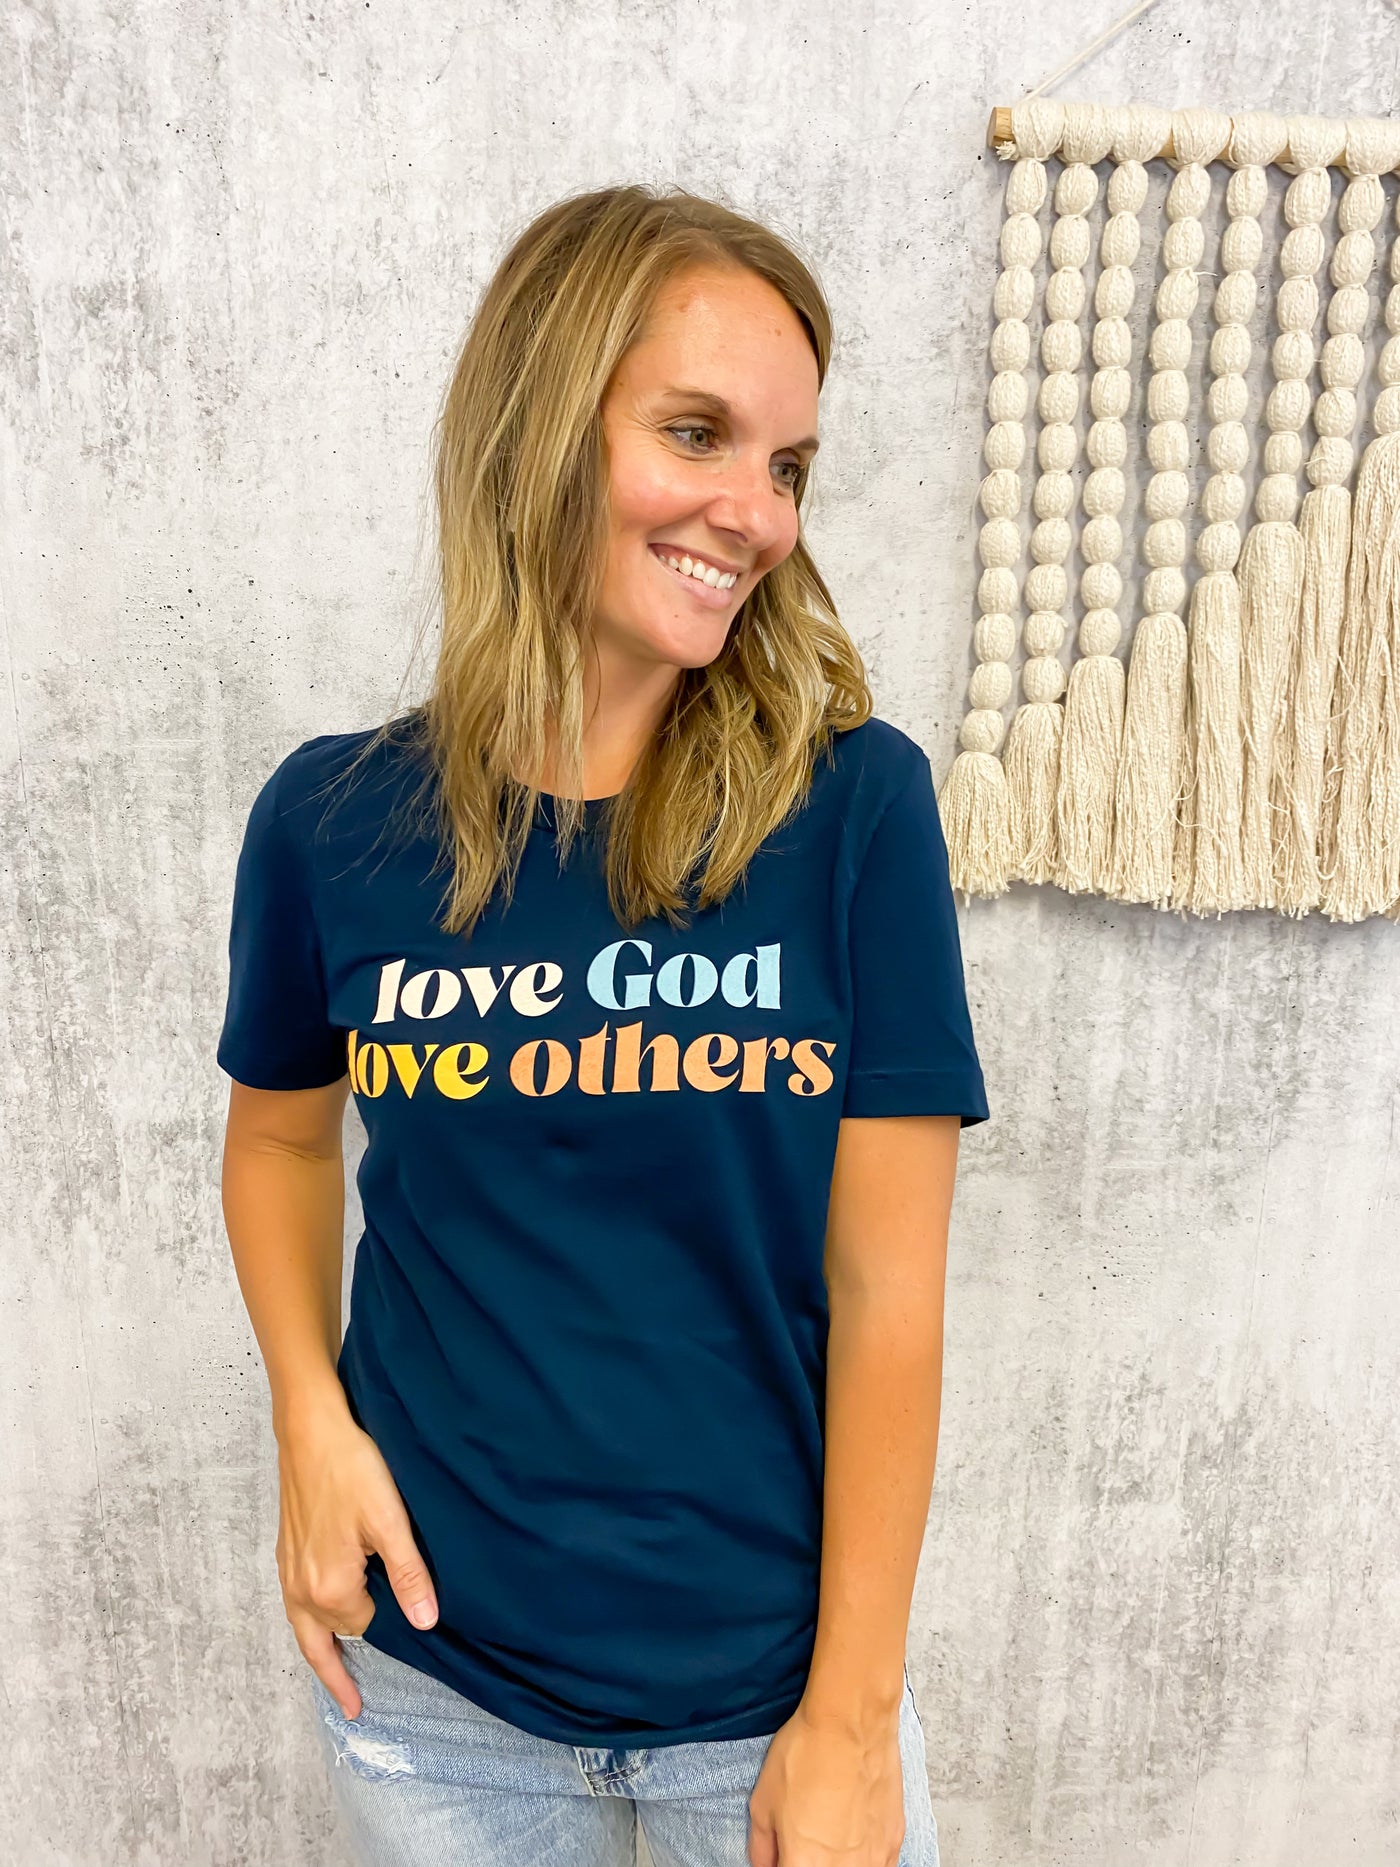 Love God Love Others